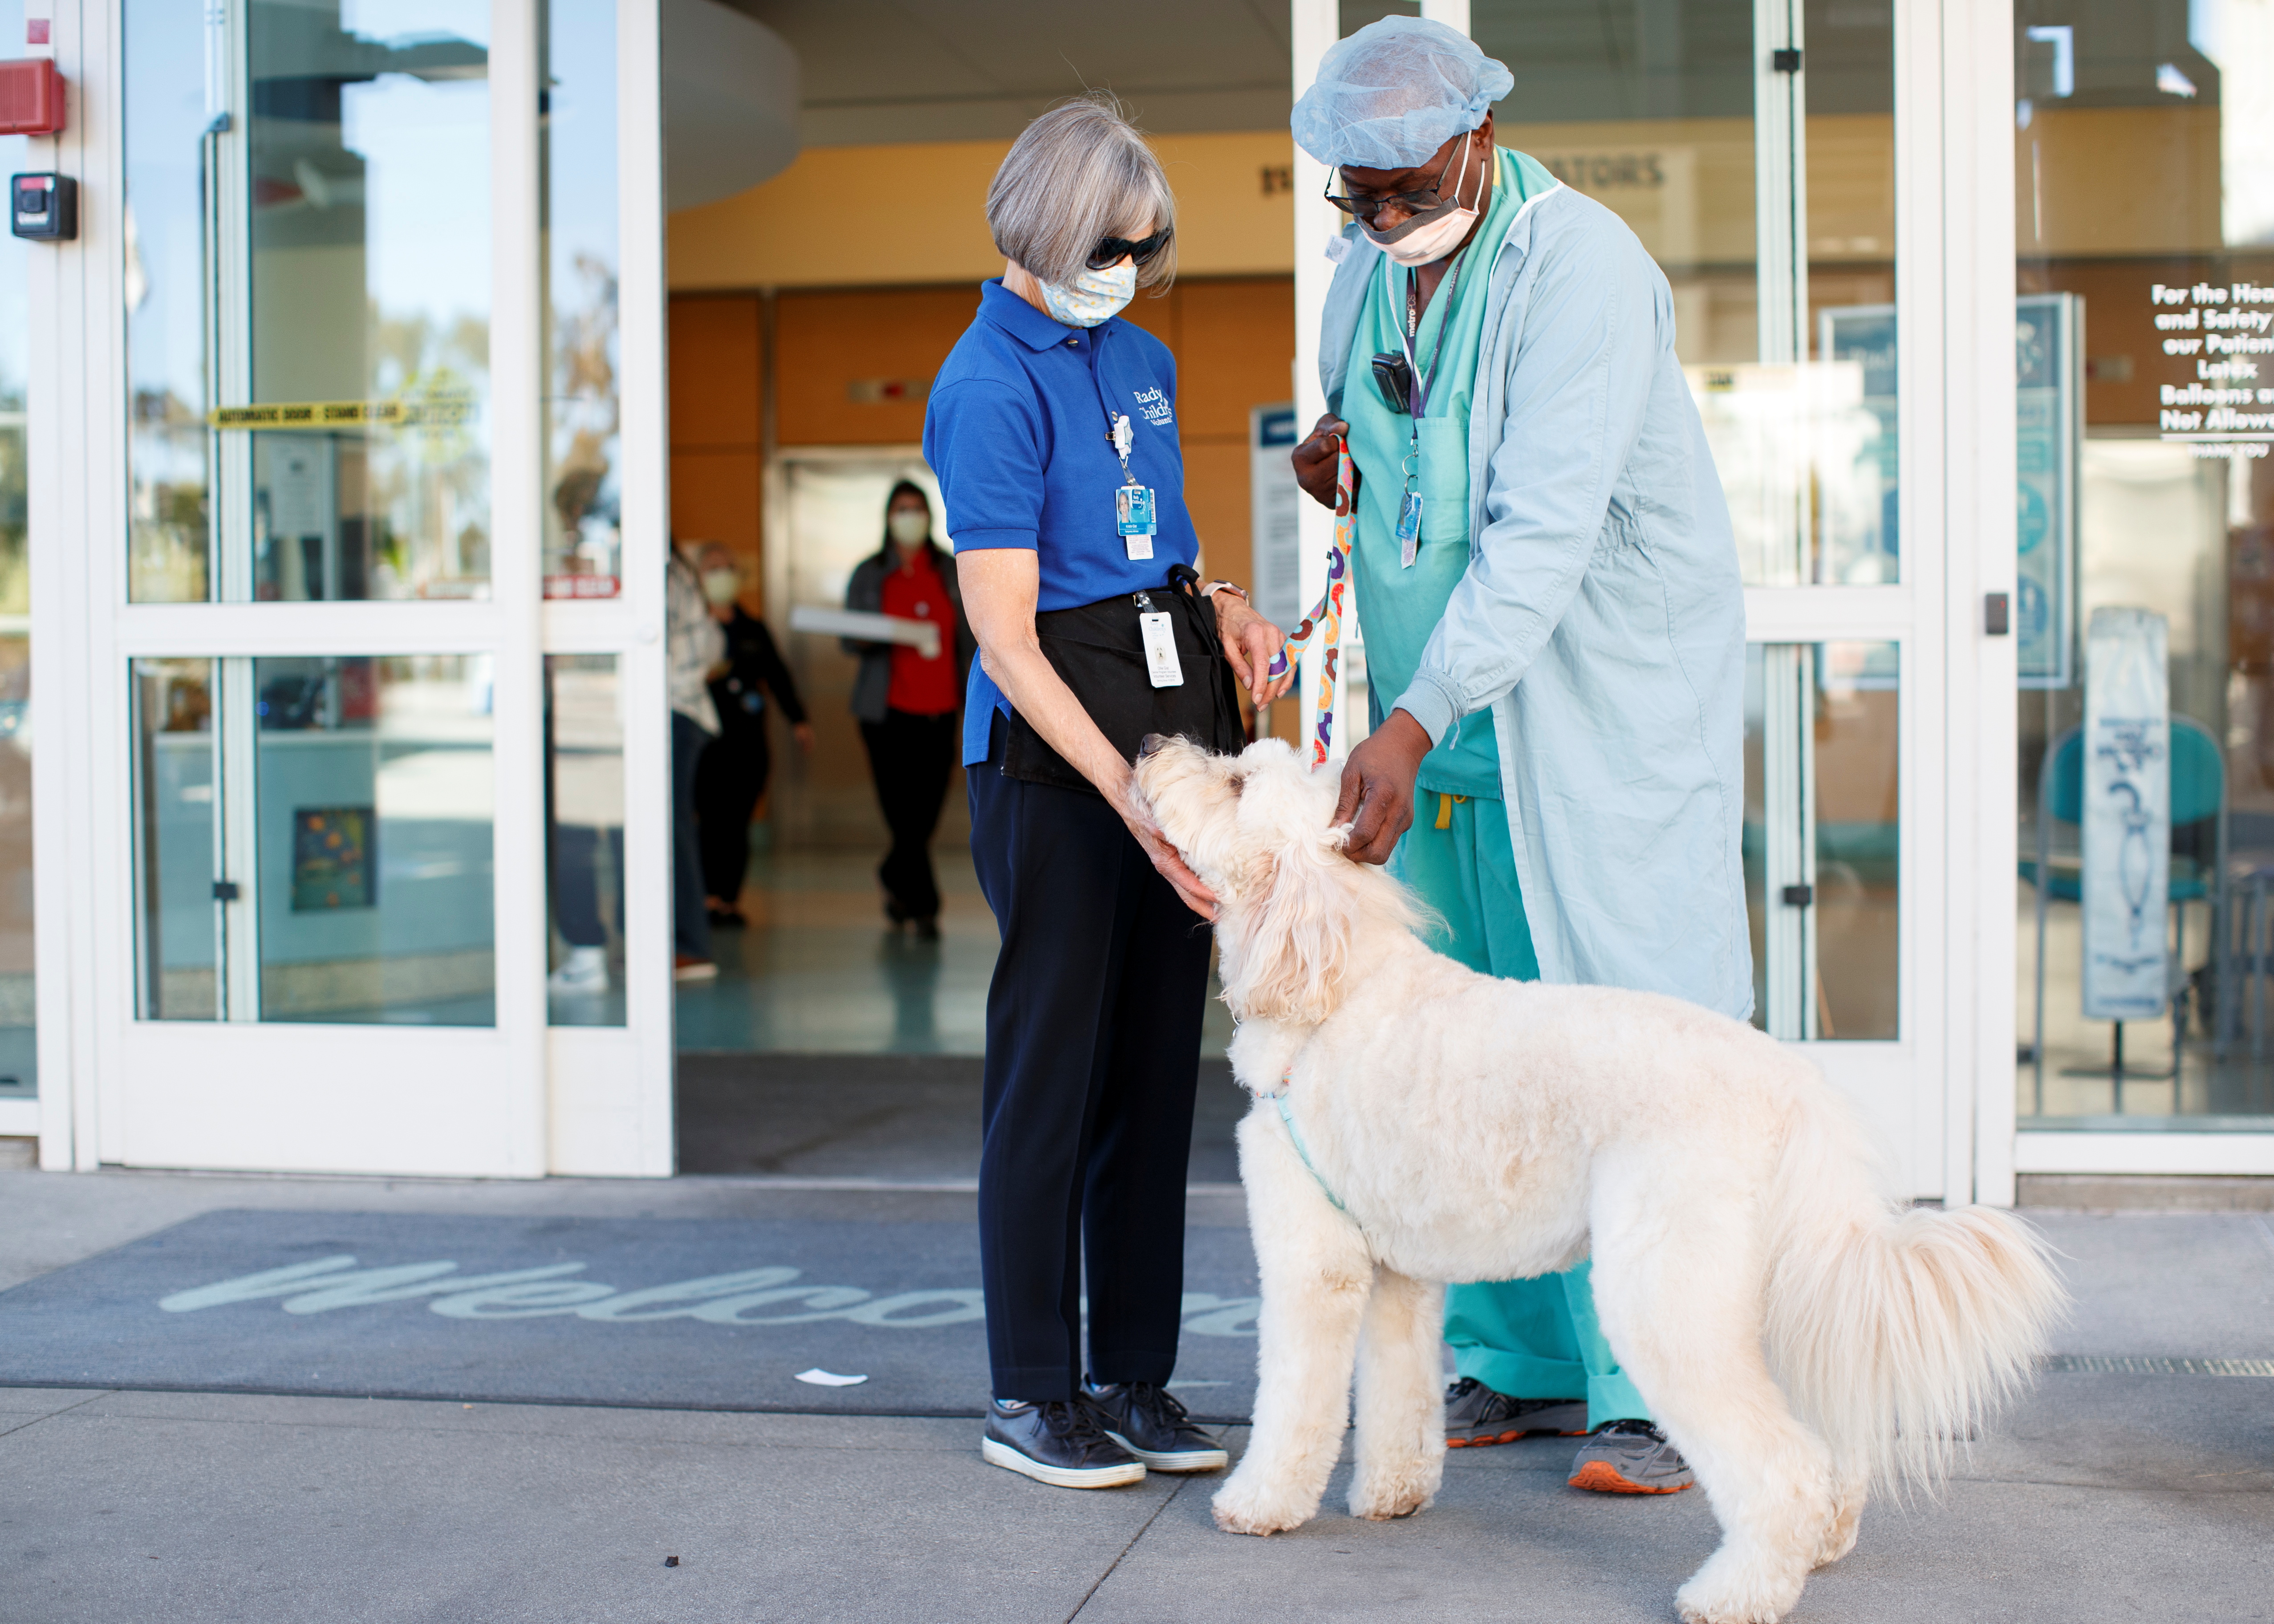 Ollie the dog returns to greet children in a hospital as COVID-19 restriction ease in California